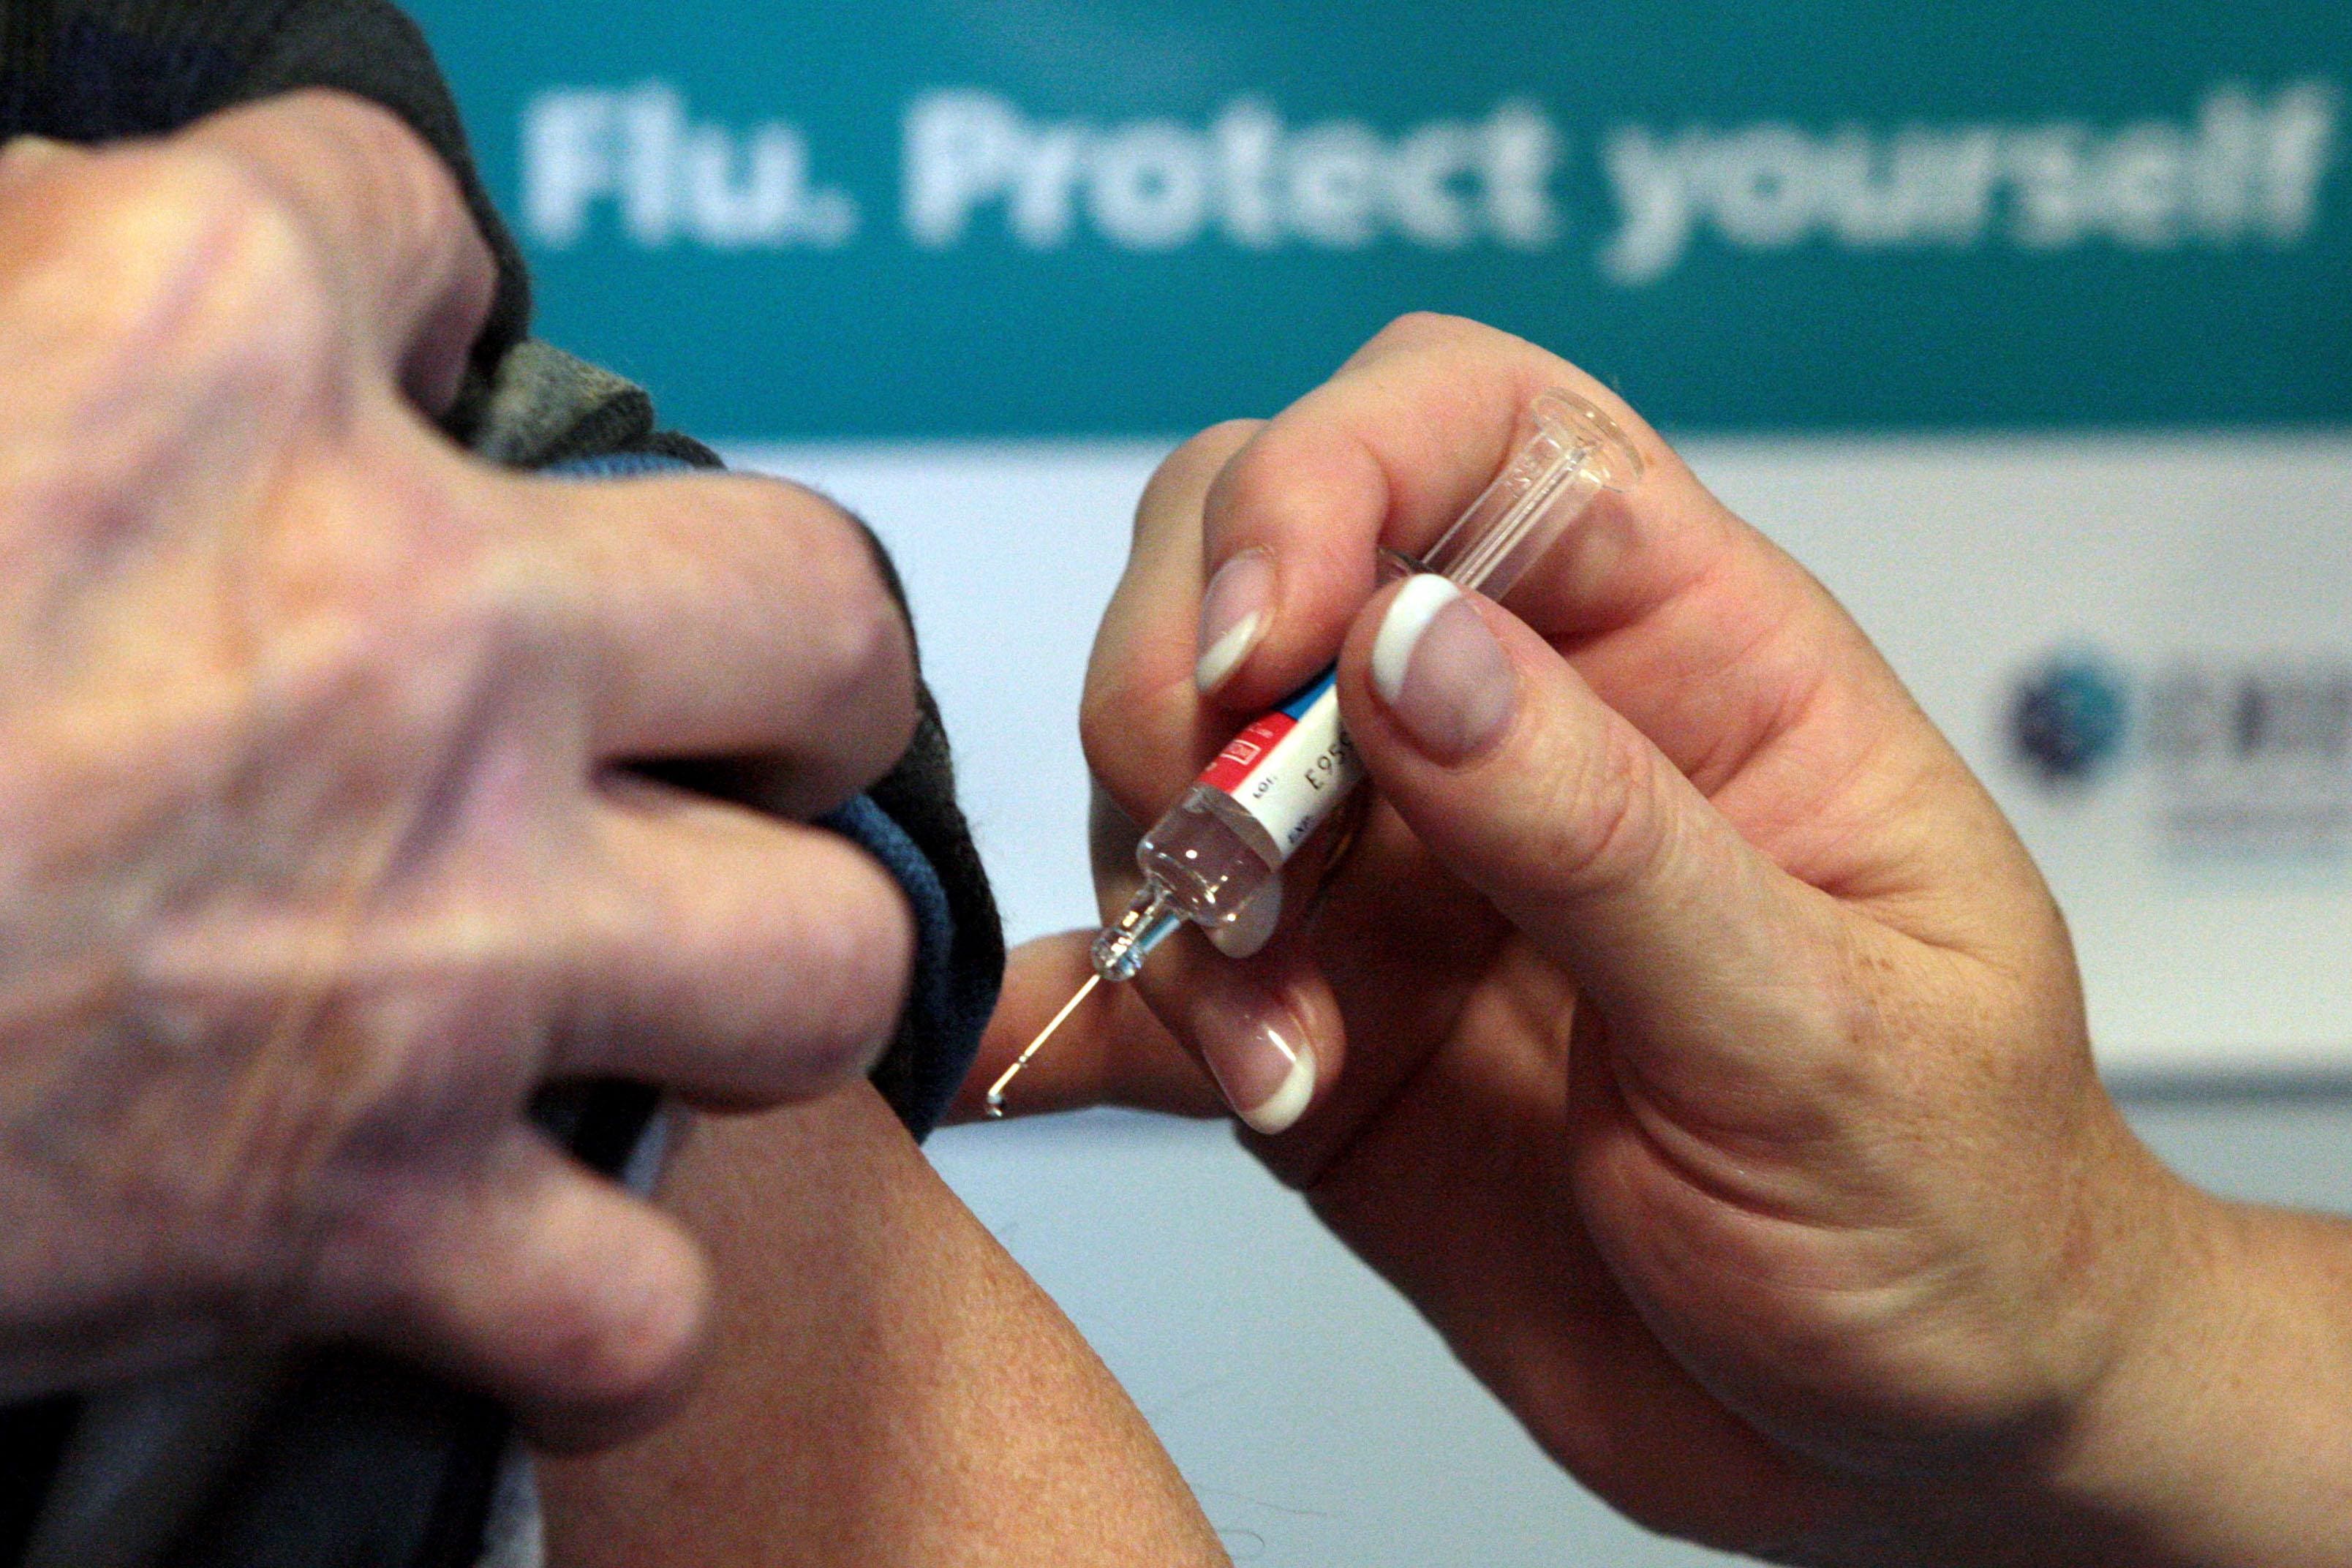 Flu cases are on the rise